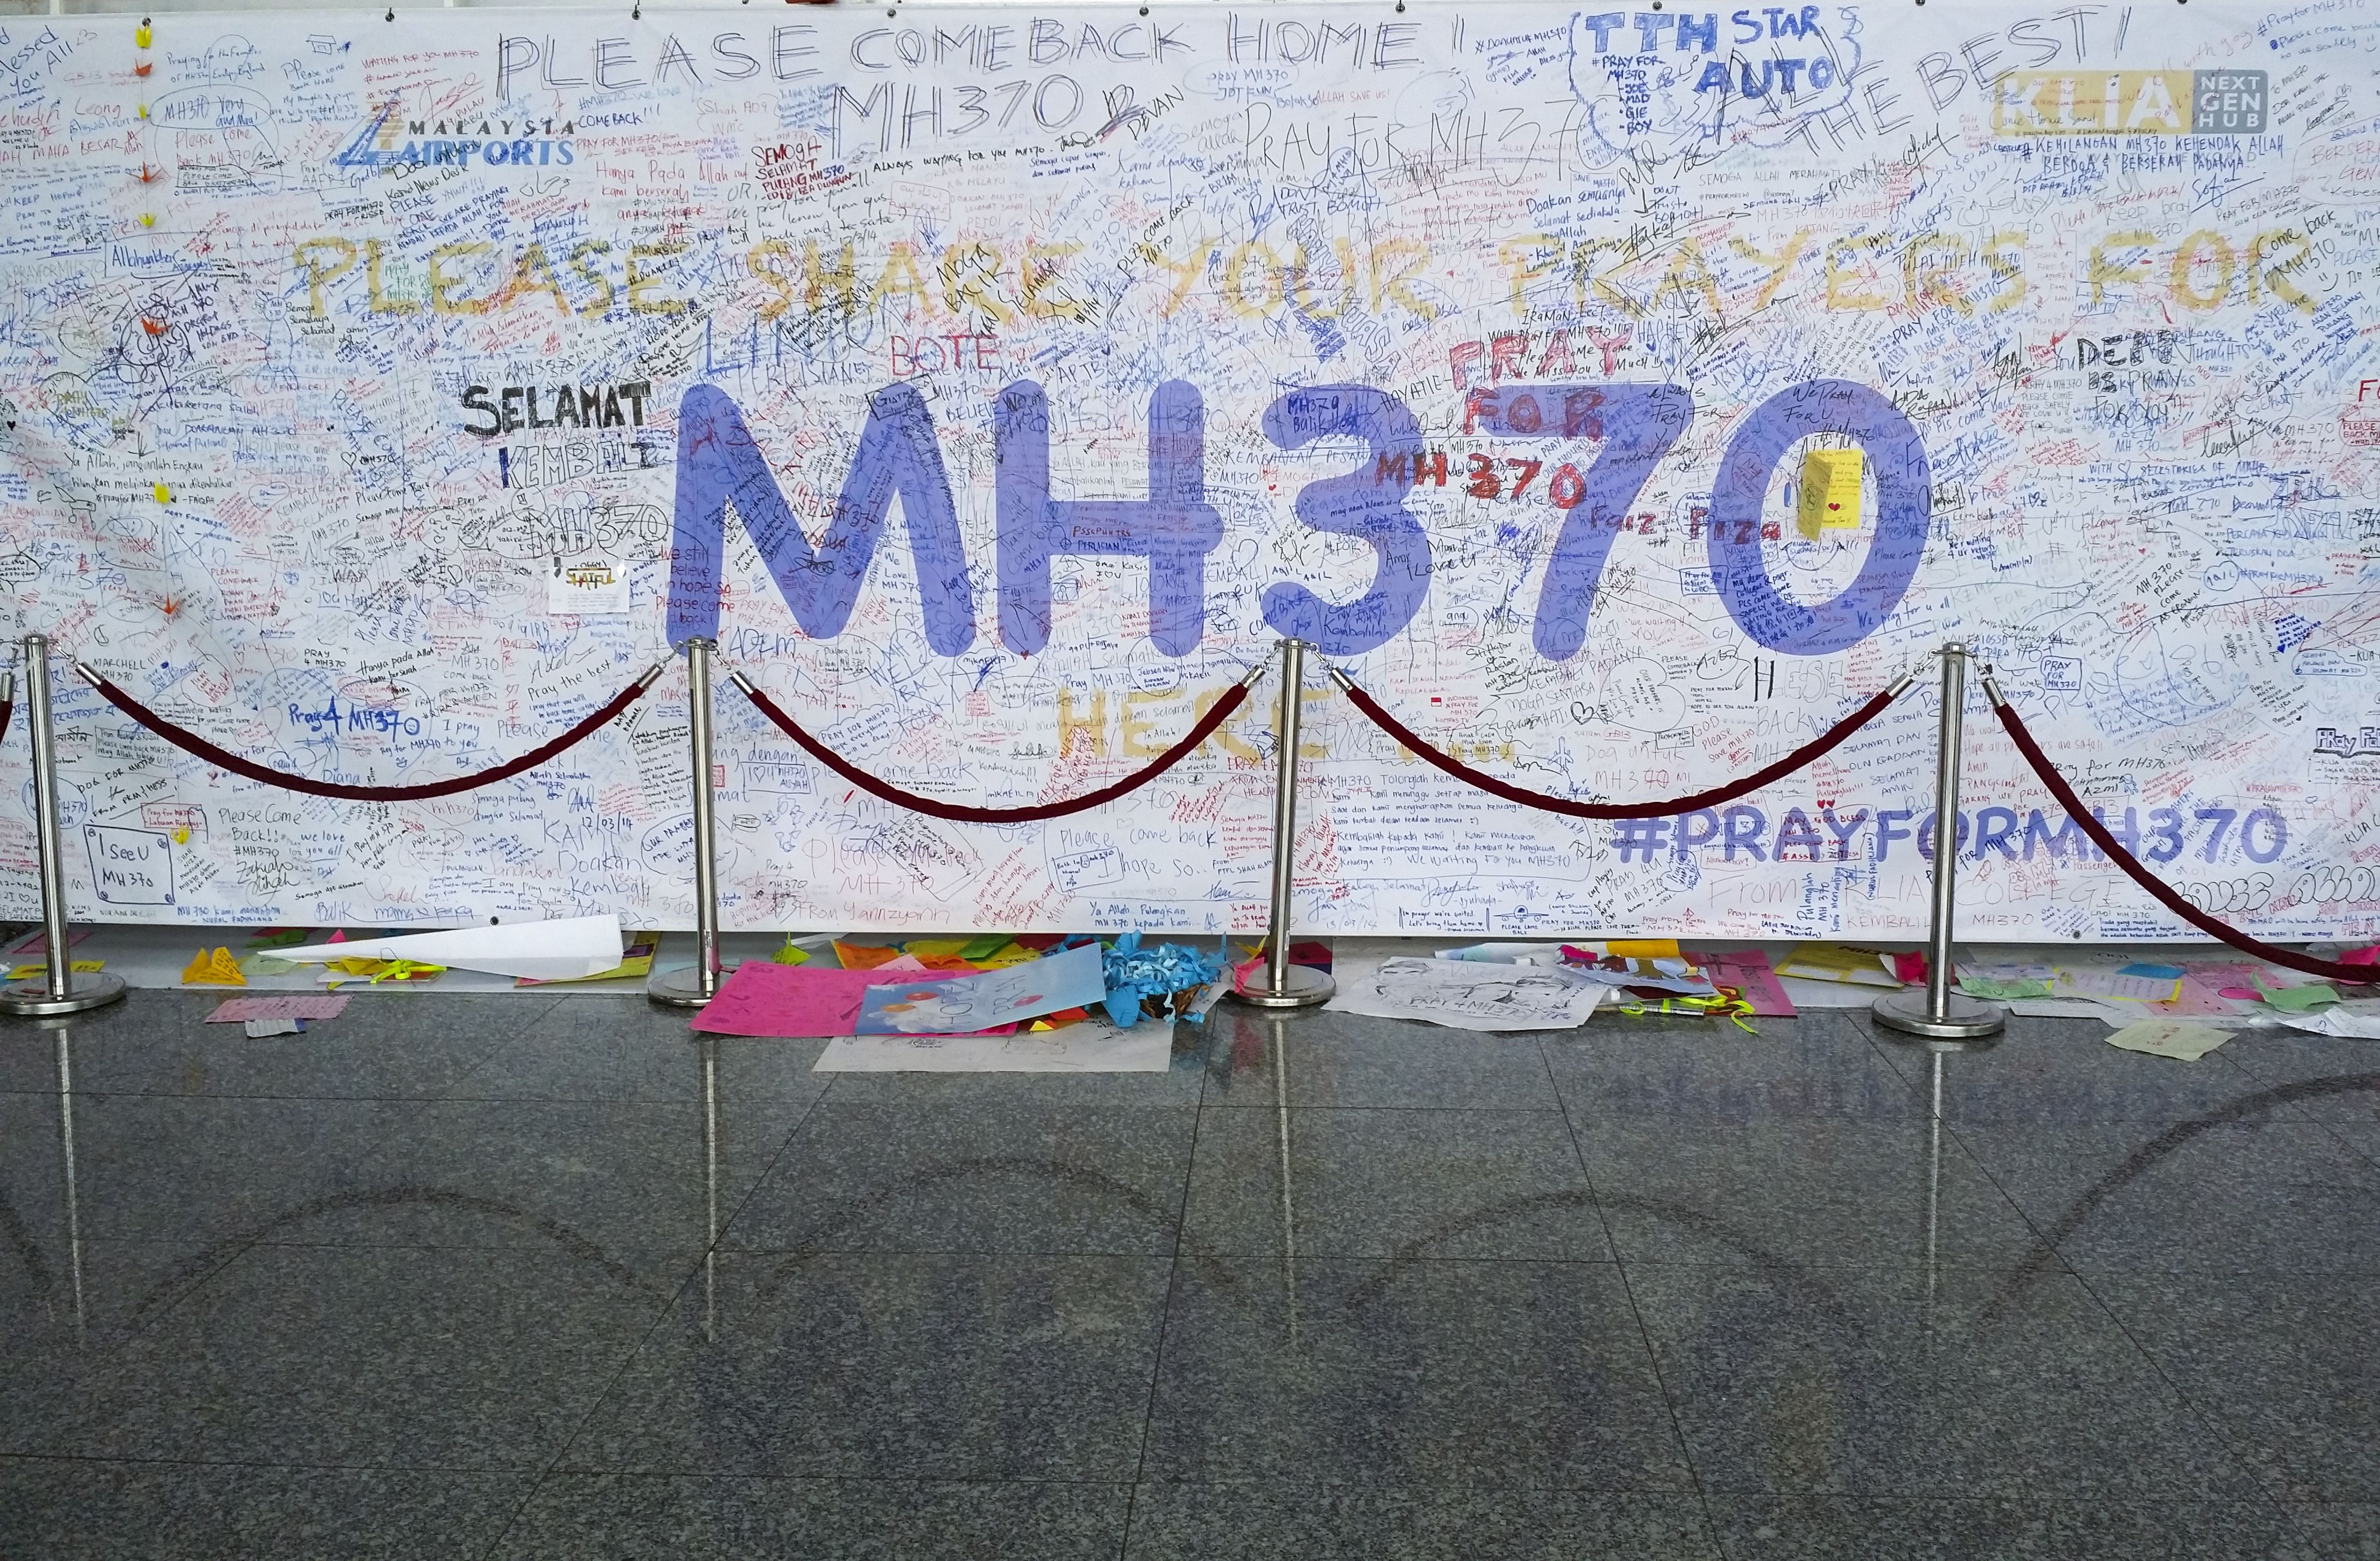 A memorial for those who perished in the Malaysian Airlines MH370 flight.